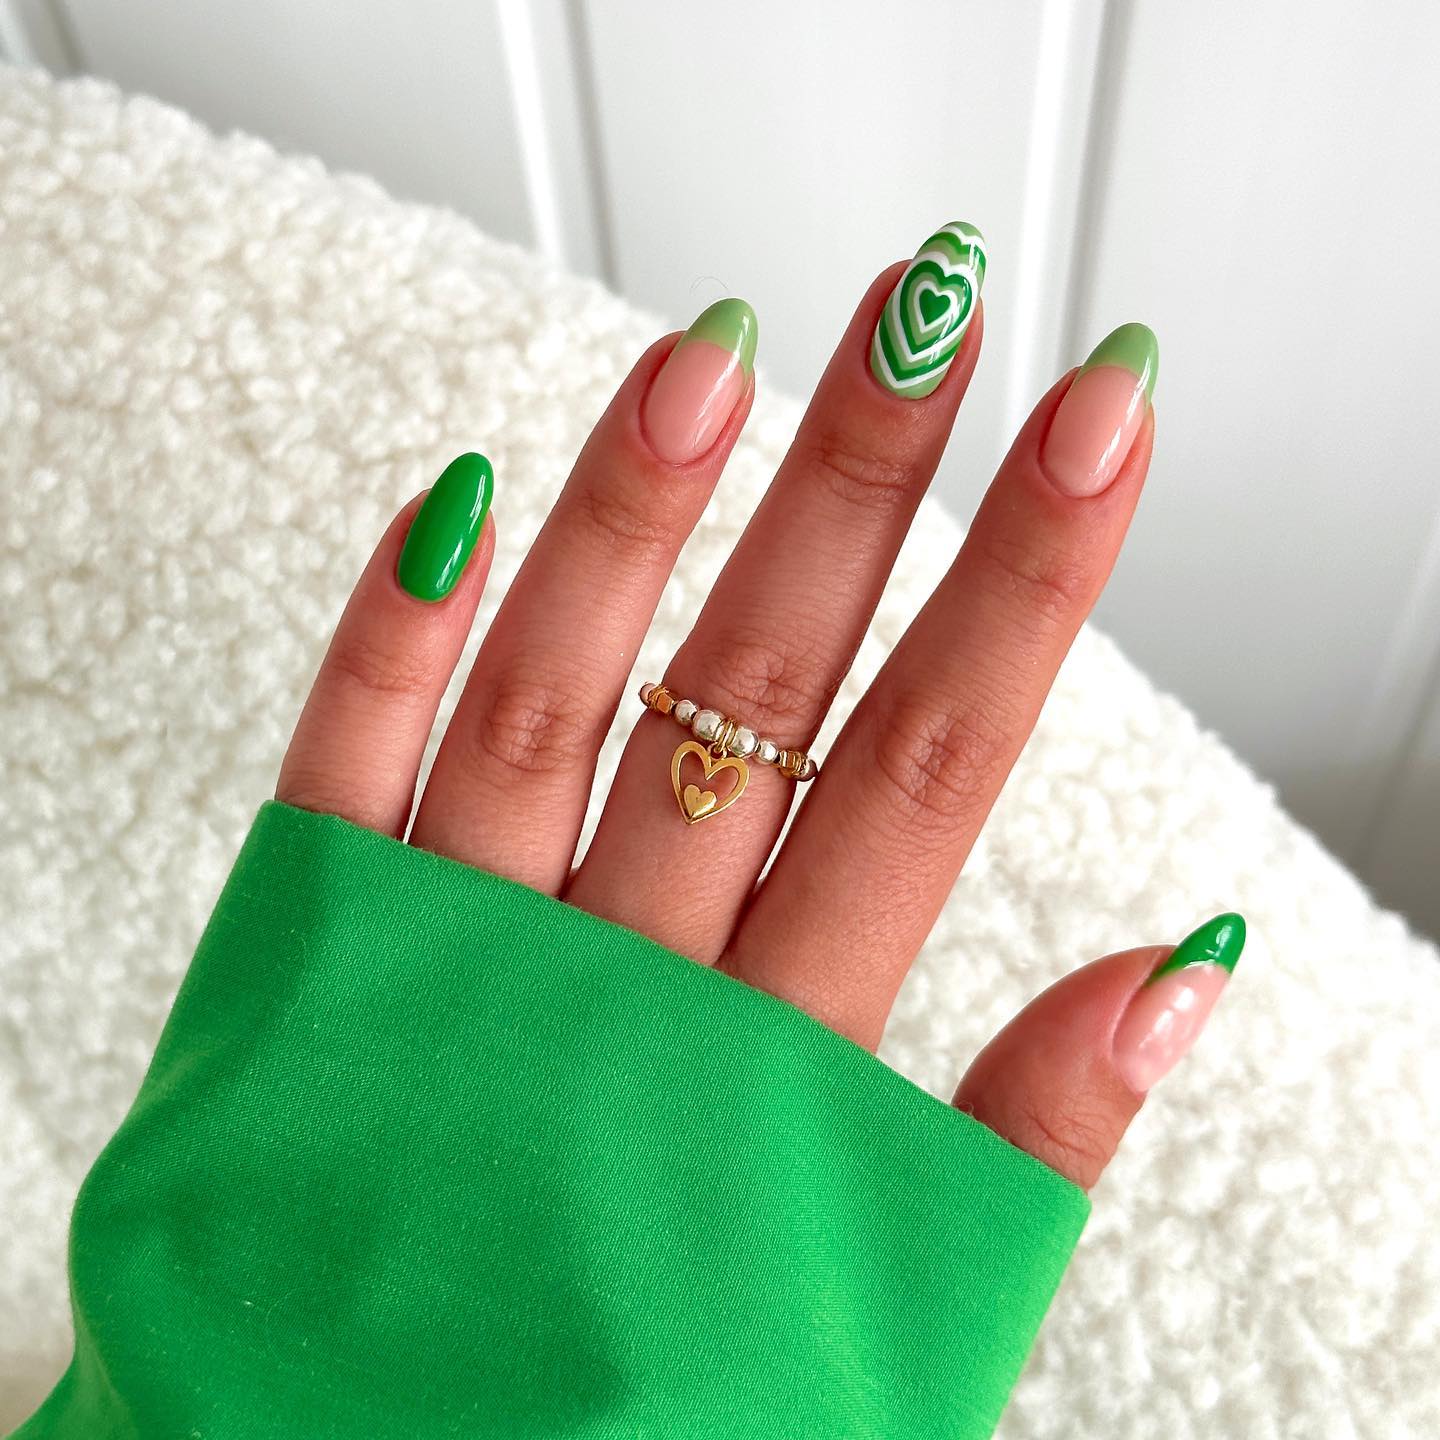 Forest Green Nails Are The Manicure Color Trend Of Our Cottagecore Dreams